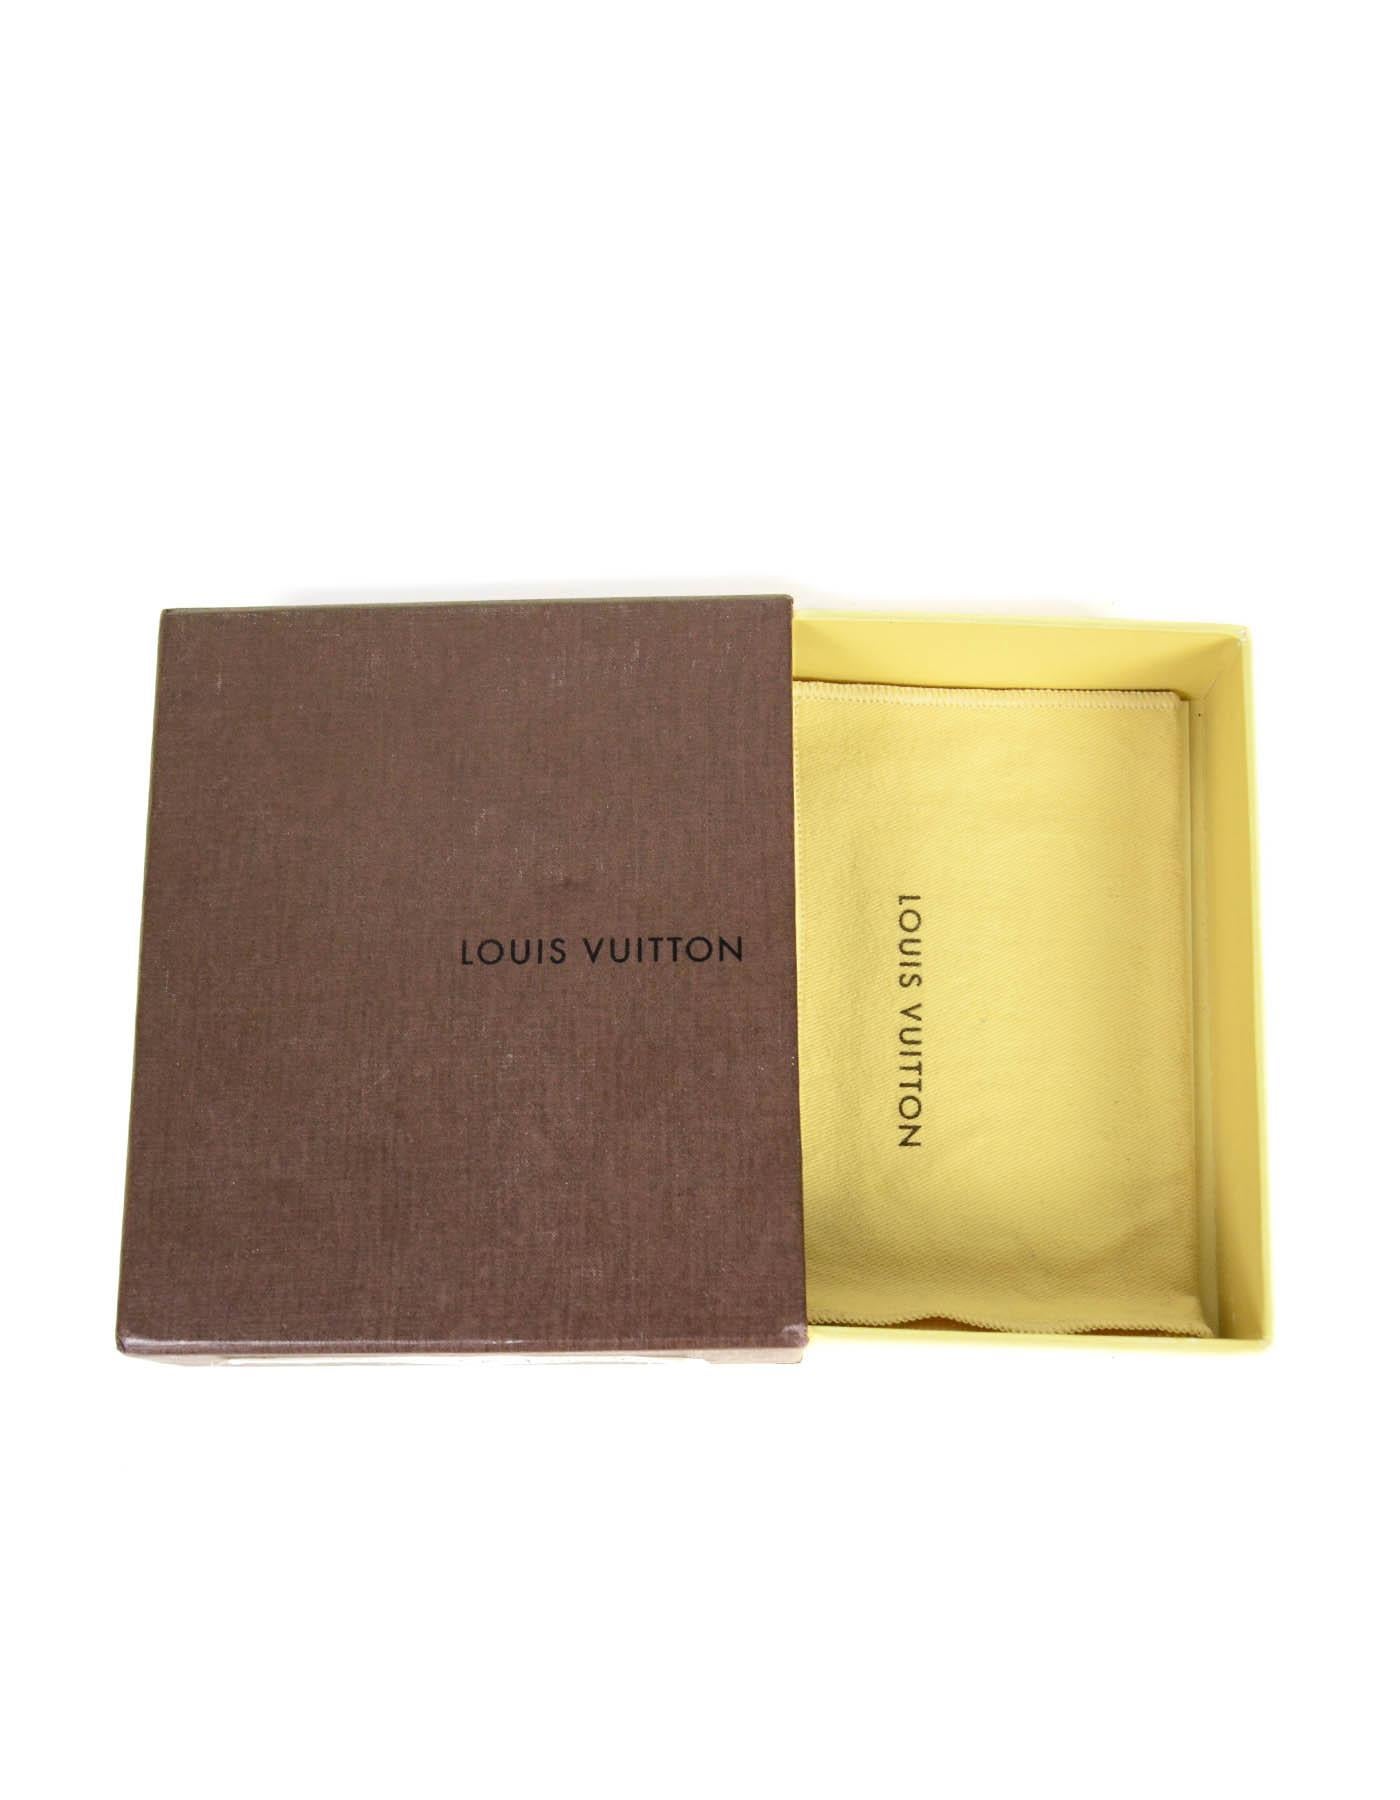 Louis Vuitton White Multicolor Monogram Card Holder

Made In: Spain
Year of Production: 2008
Color: White and multicolor
Hardware: Goldtone
Materials: Coated canvas
Lining:
Closure/Opening: Flap top with snap
Exterior Pockets: Back slit
Interior